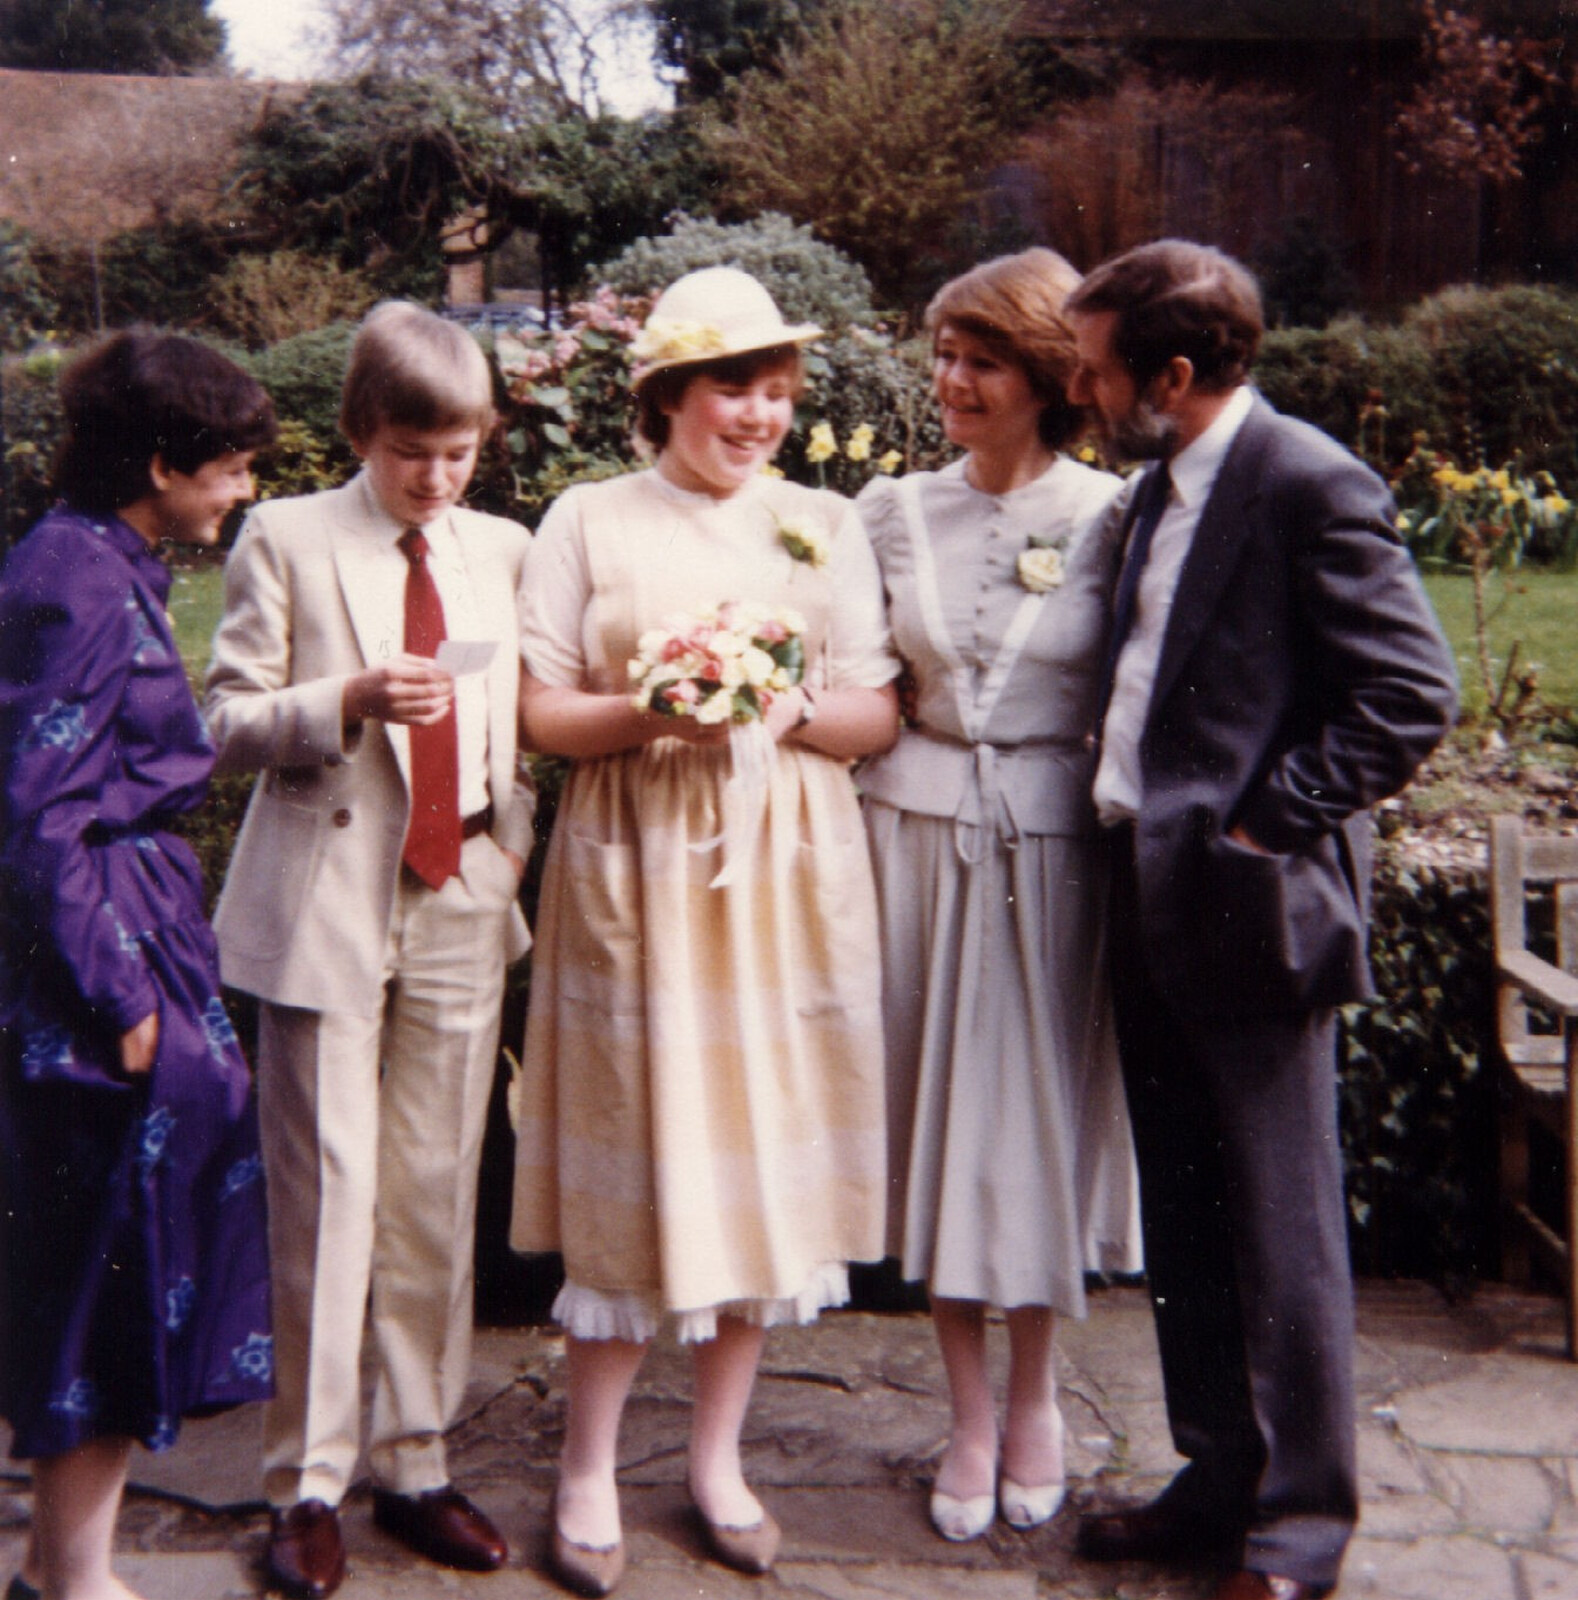 Family History: The 1980s - 24th January 2020: At Mother's second wedding in Beaulieu, 1983